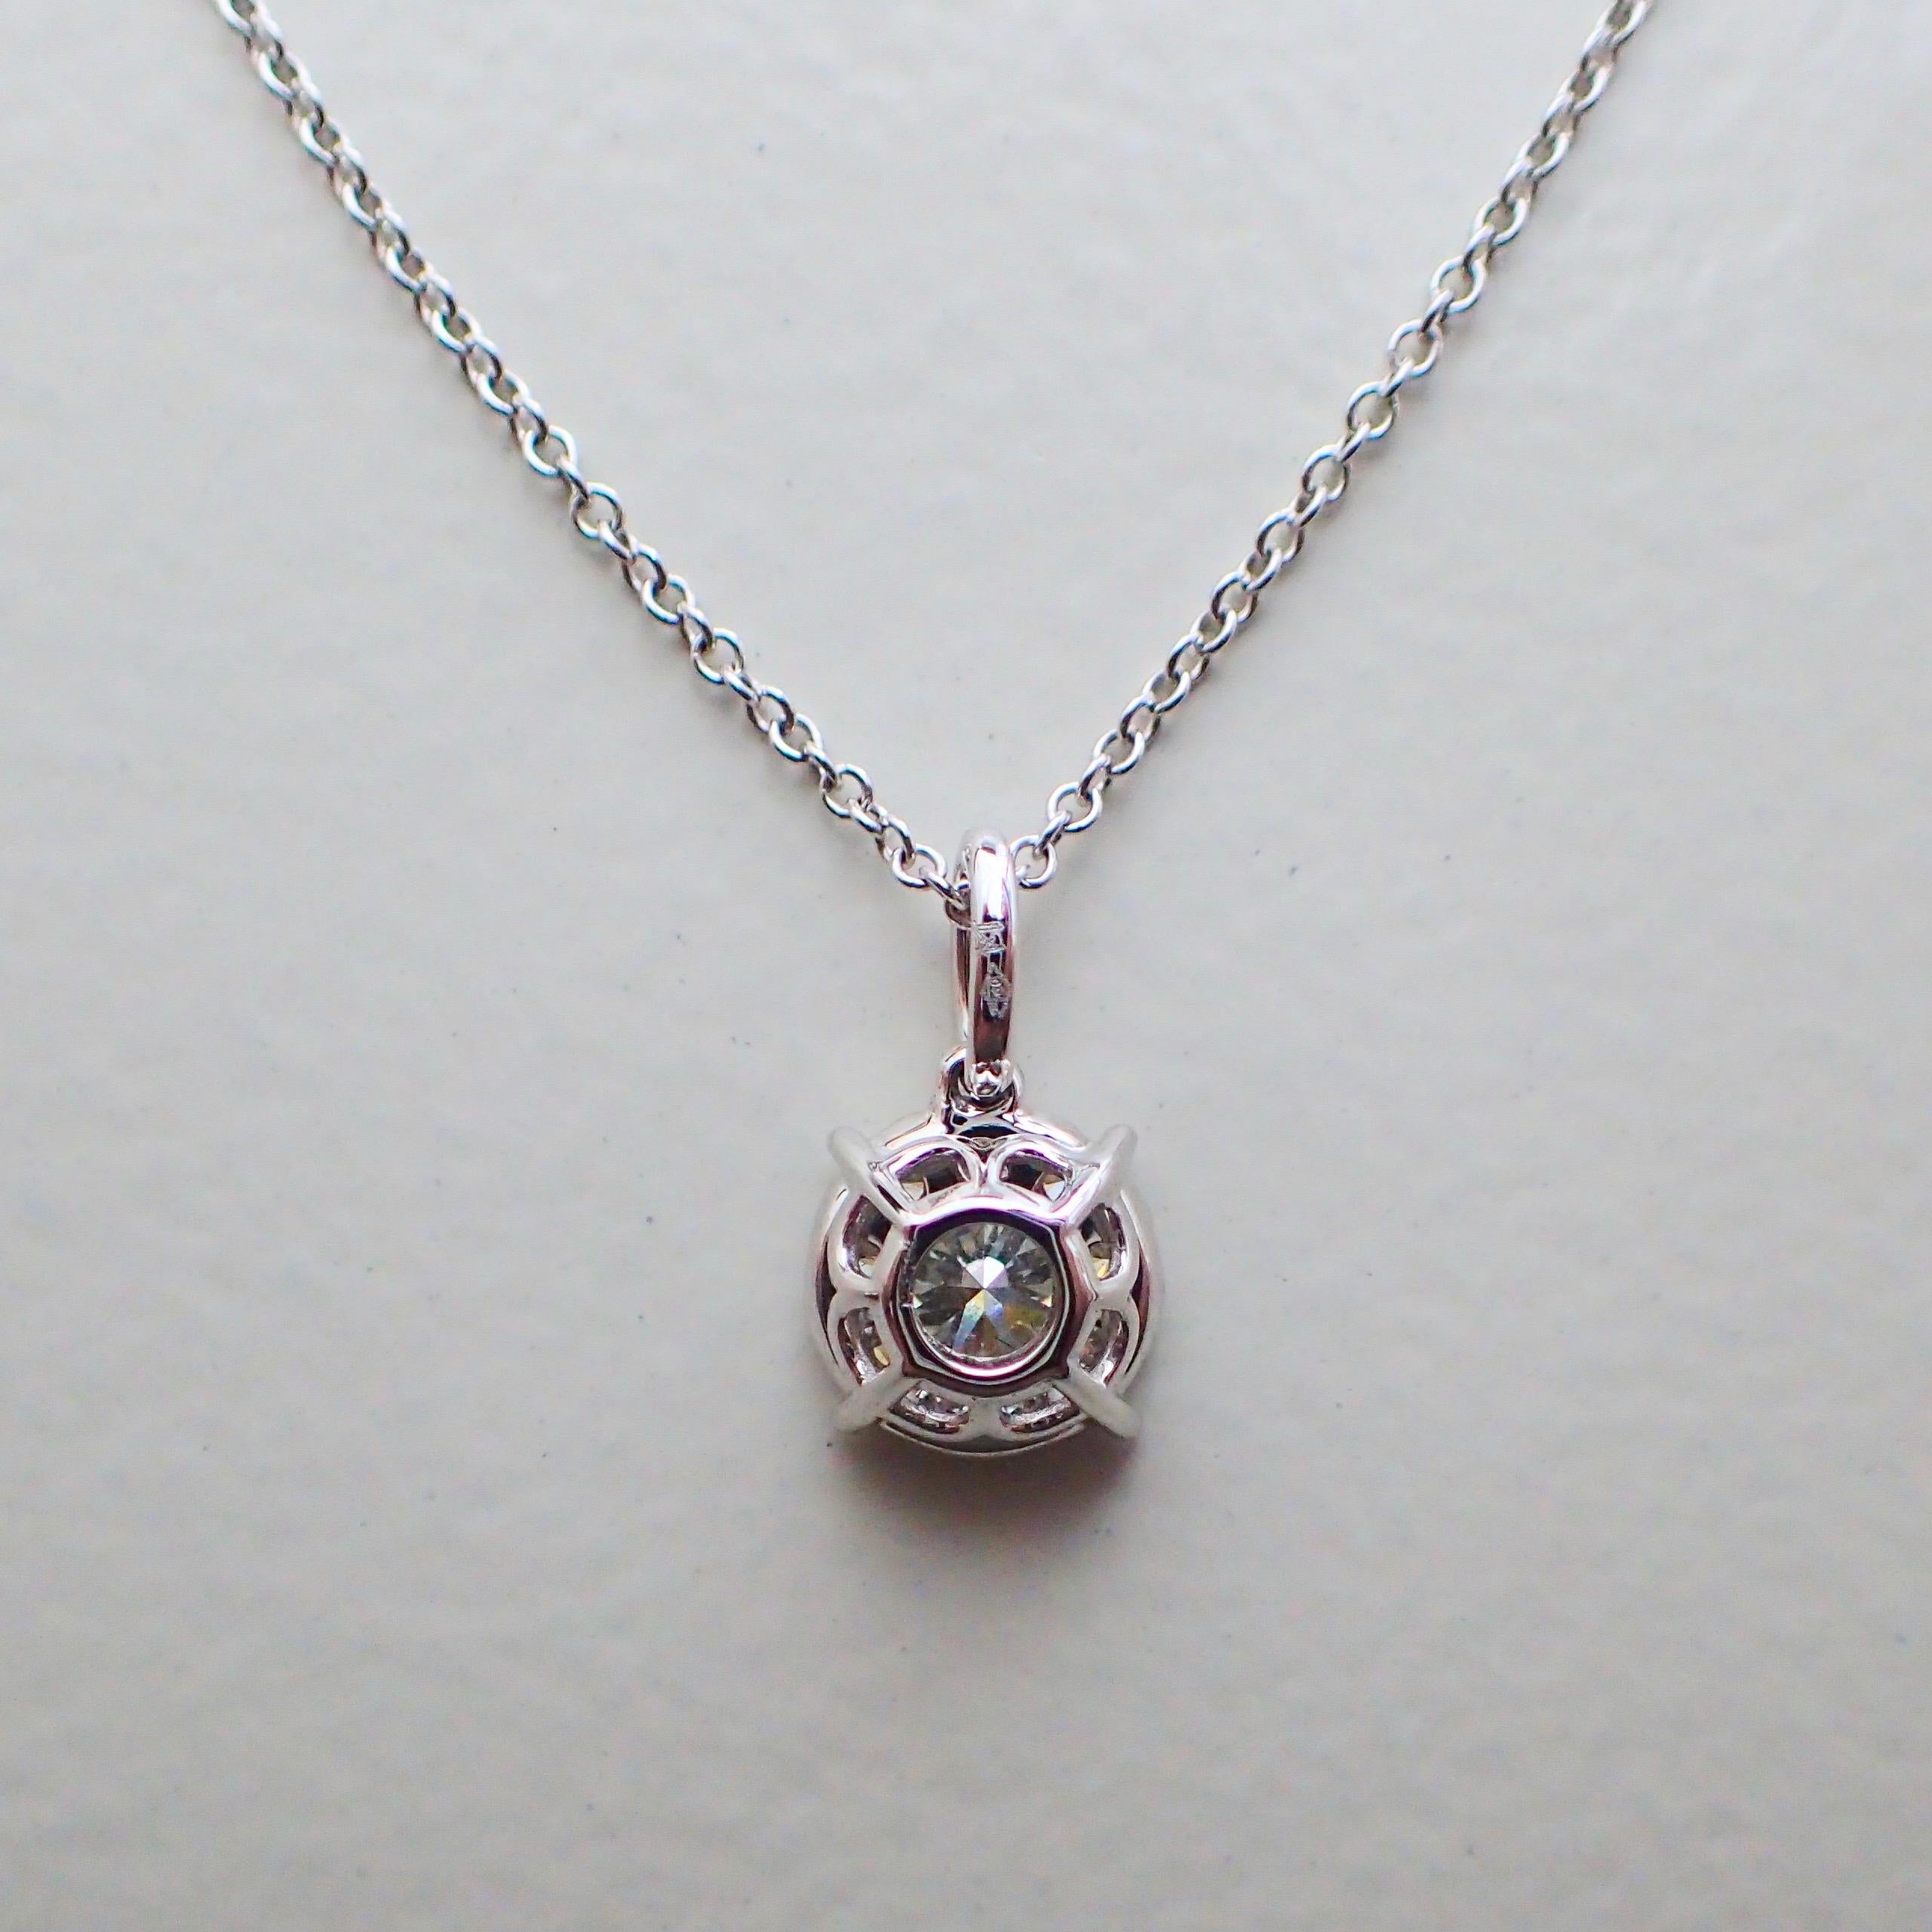 Round Cut 18 Karat White Gold Pendant with 0.46 Carat of Diamond Hangs from a Chain For Sale